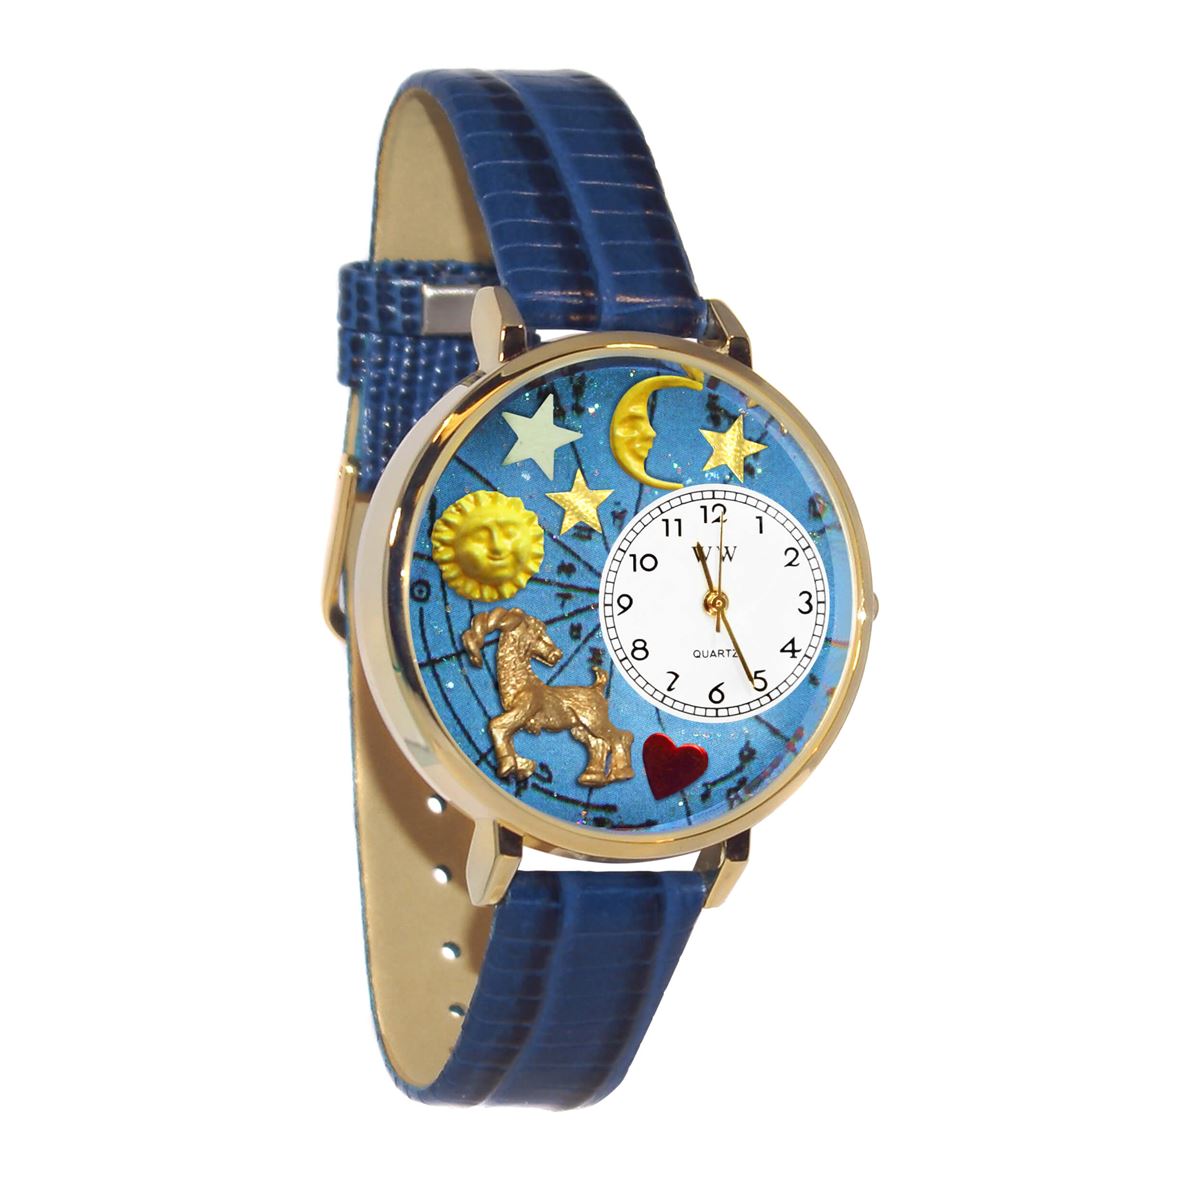 Whimsical Gifts | Capricorn Zodiac 3D Watch Large Style | Handmade in USA | Zodiac & Celestial |  | Novelty Unique Fun Miniatures Gift | Gold Finish Royal Blue Leather Watch Band